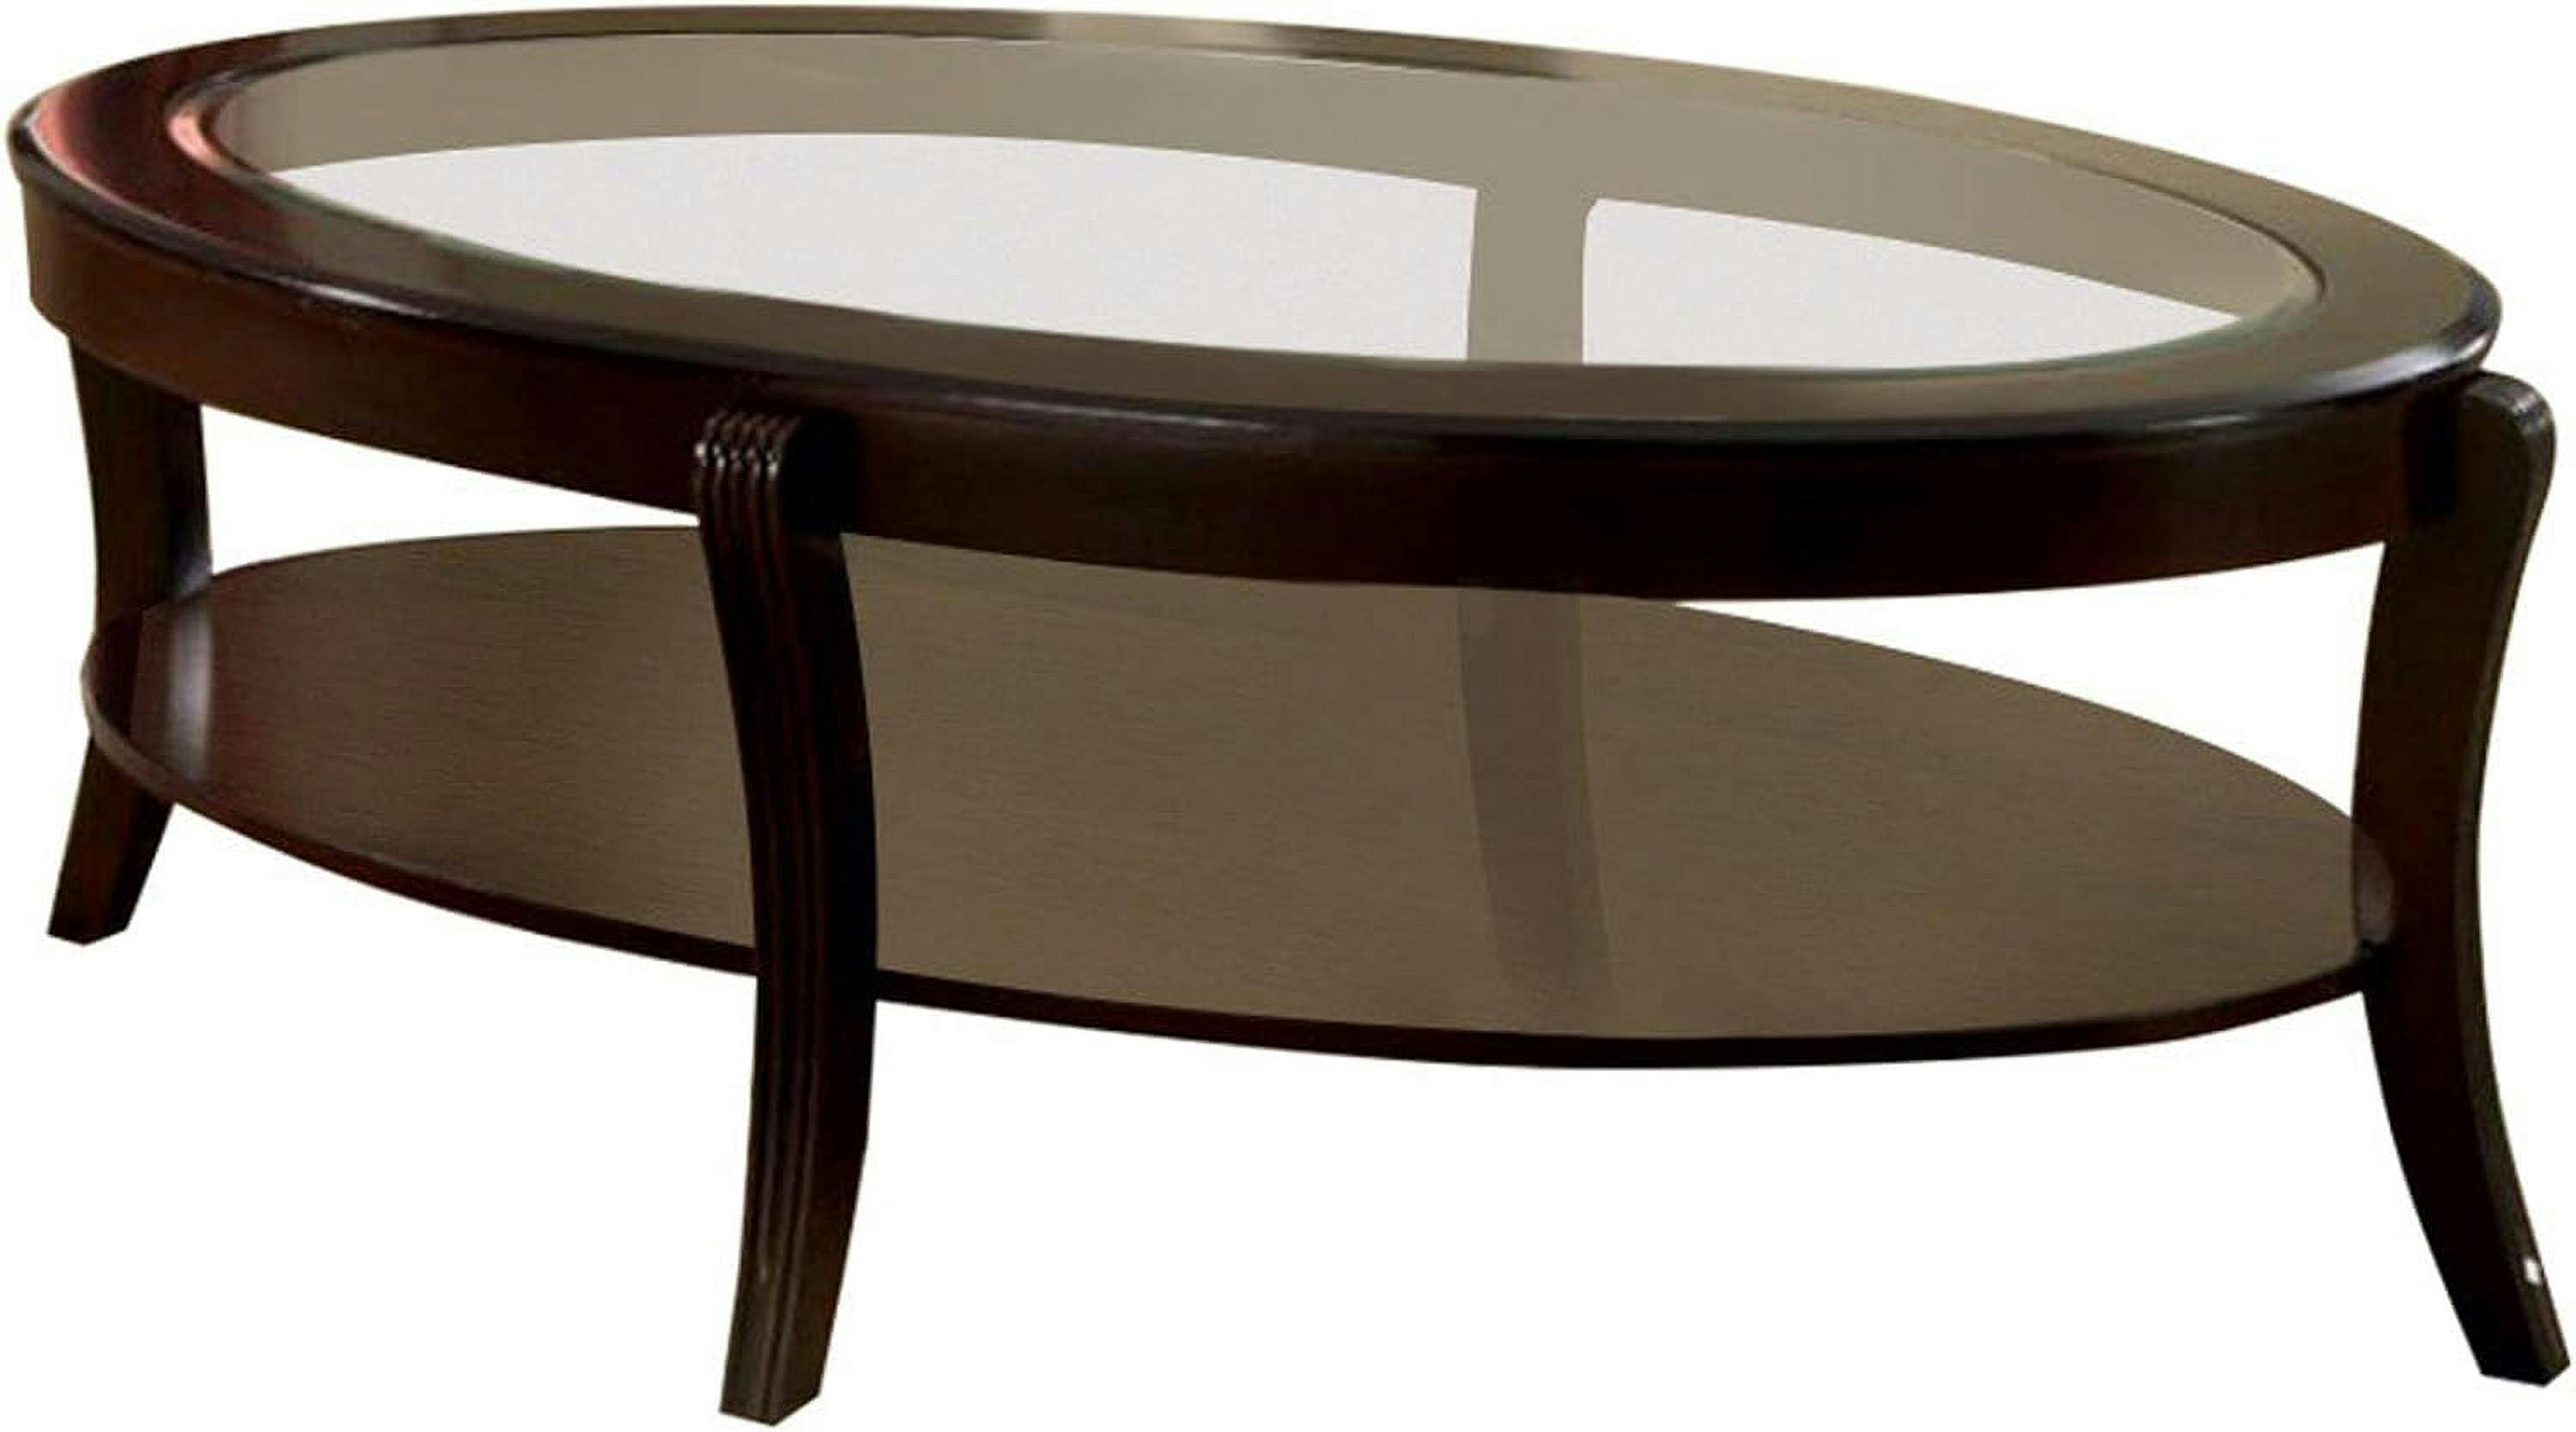 Finley Contemporary Oval Coffee Table with Beveled Glass and Wood Storage